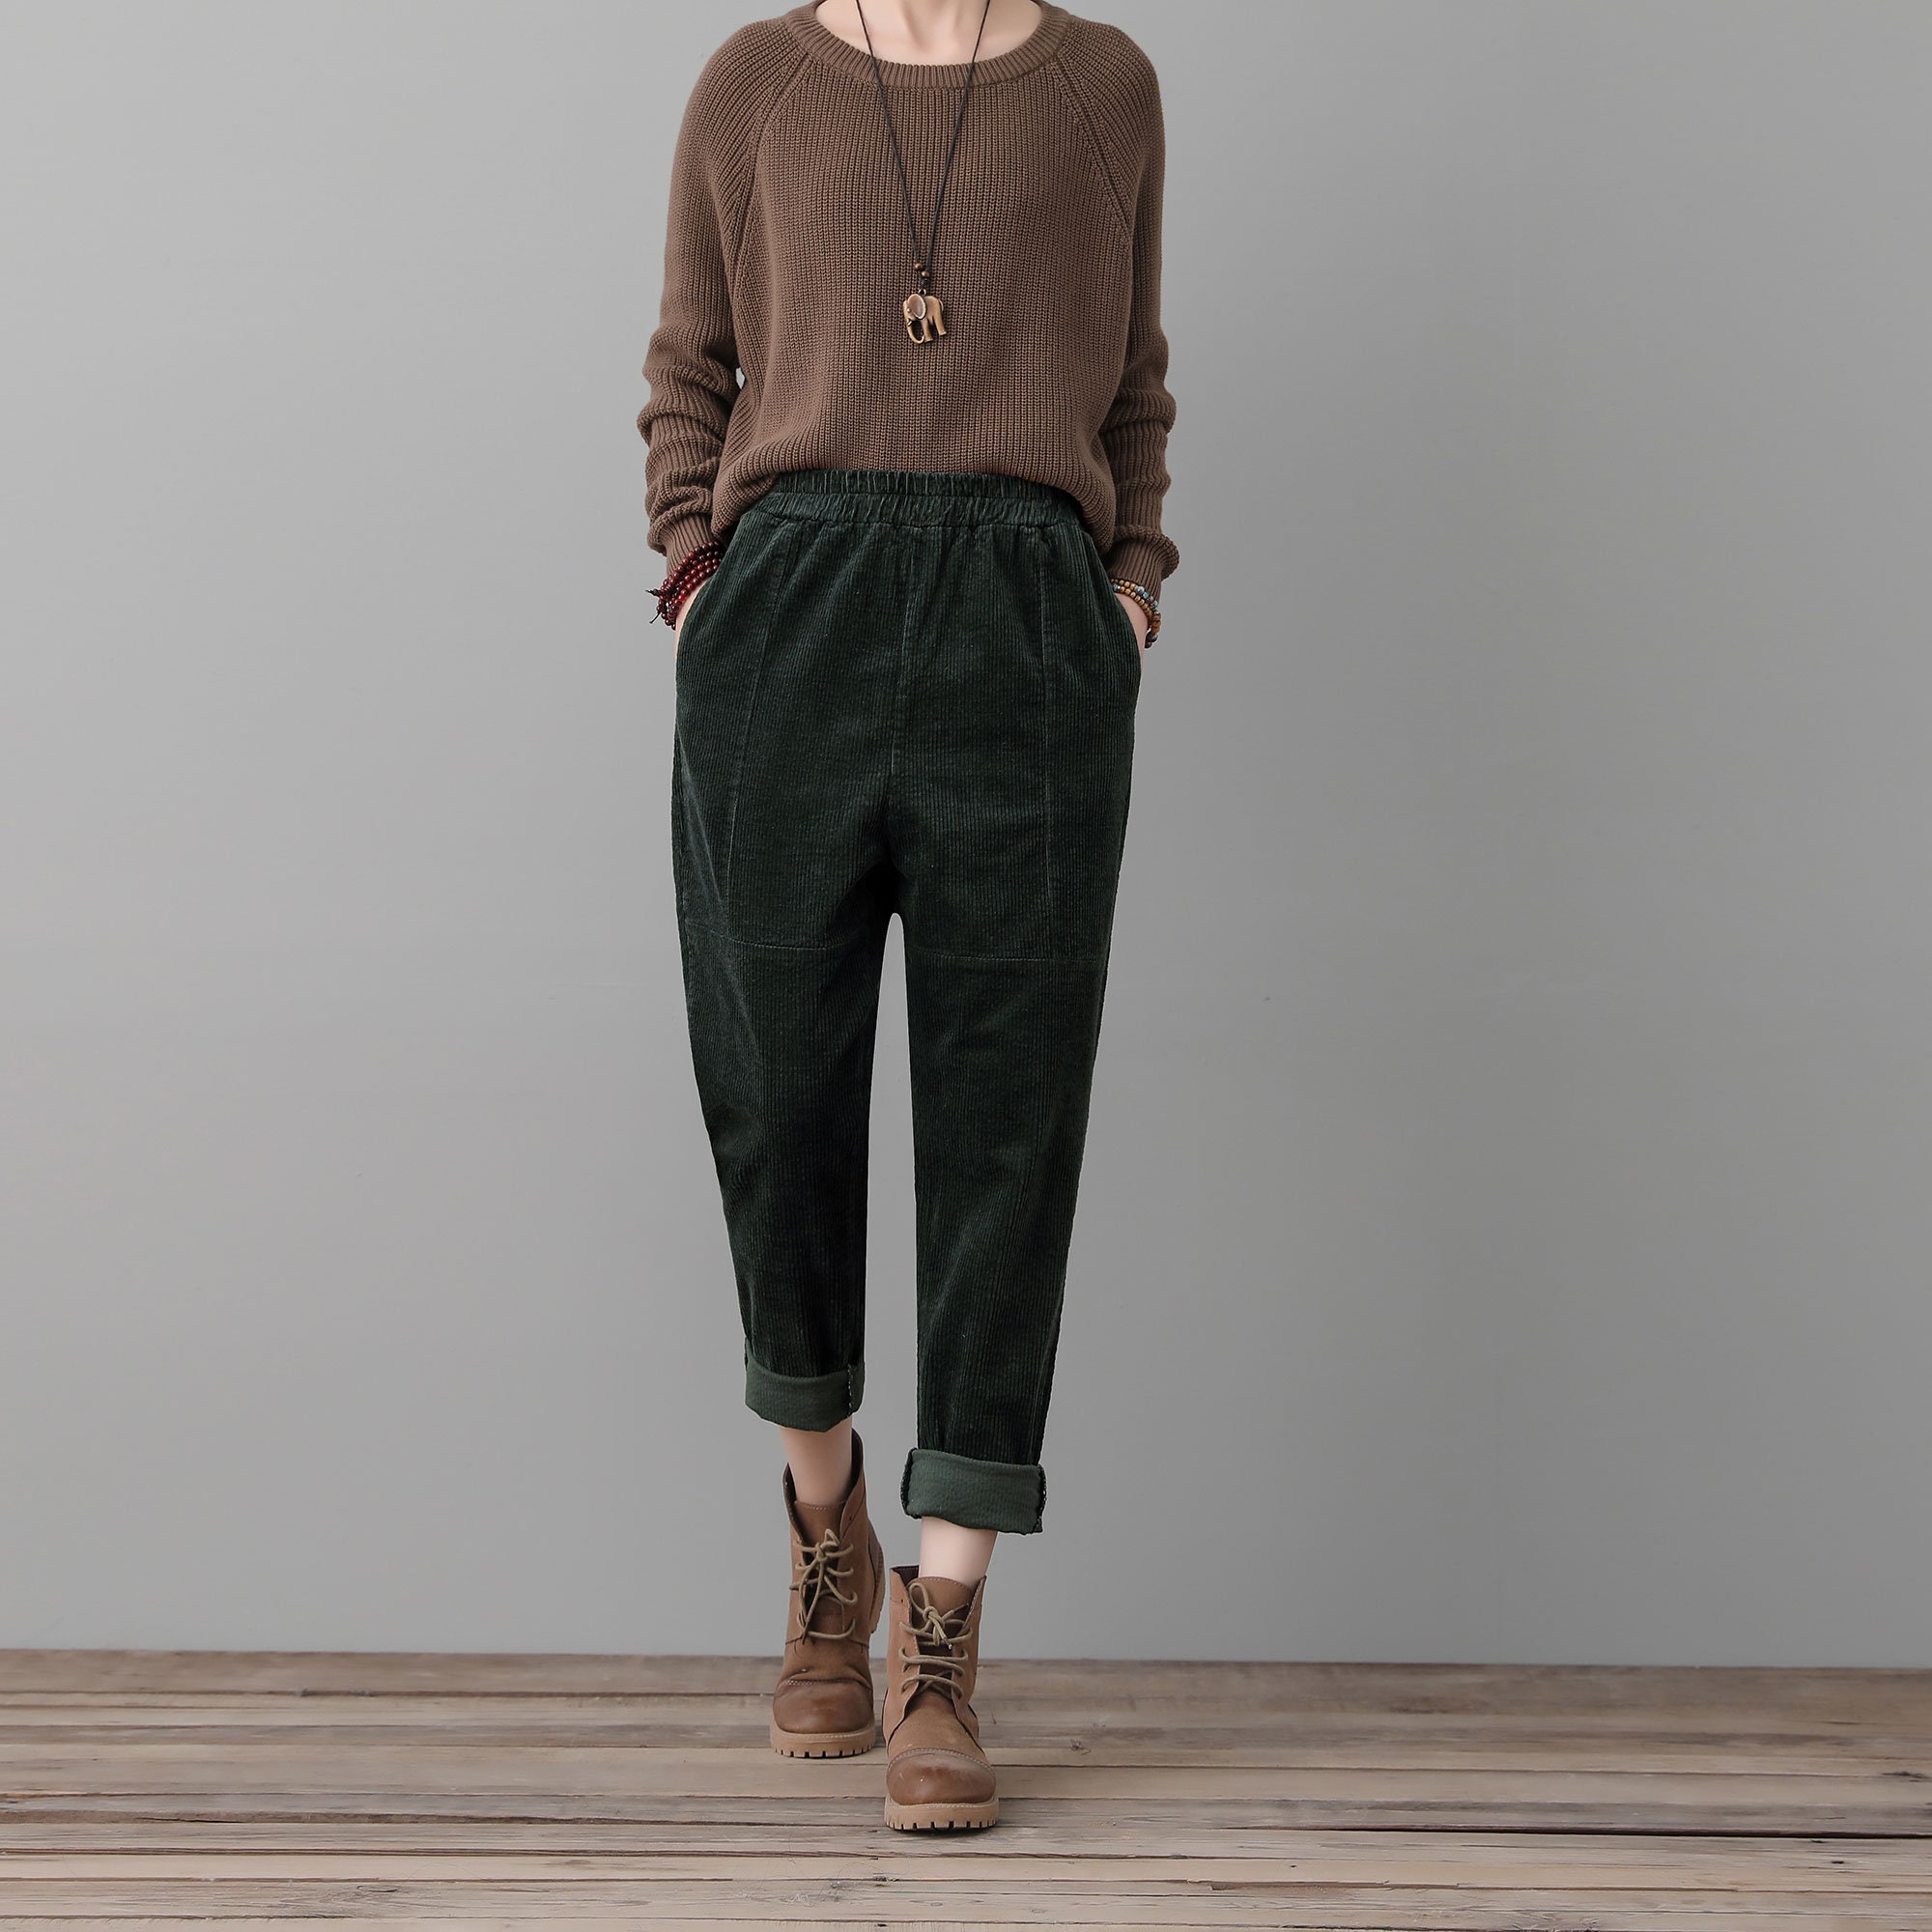 Green Corduroy Pants Outfit | Outfits, Winter outfits, Corduroy pants outfit